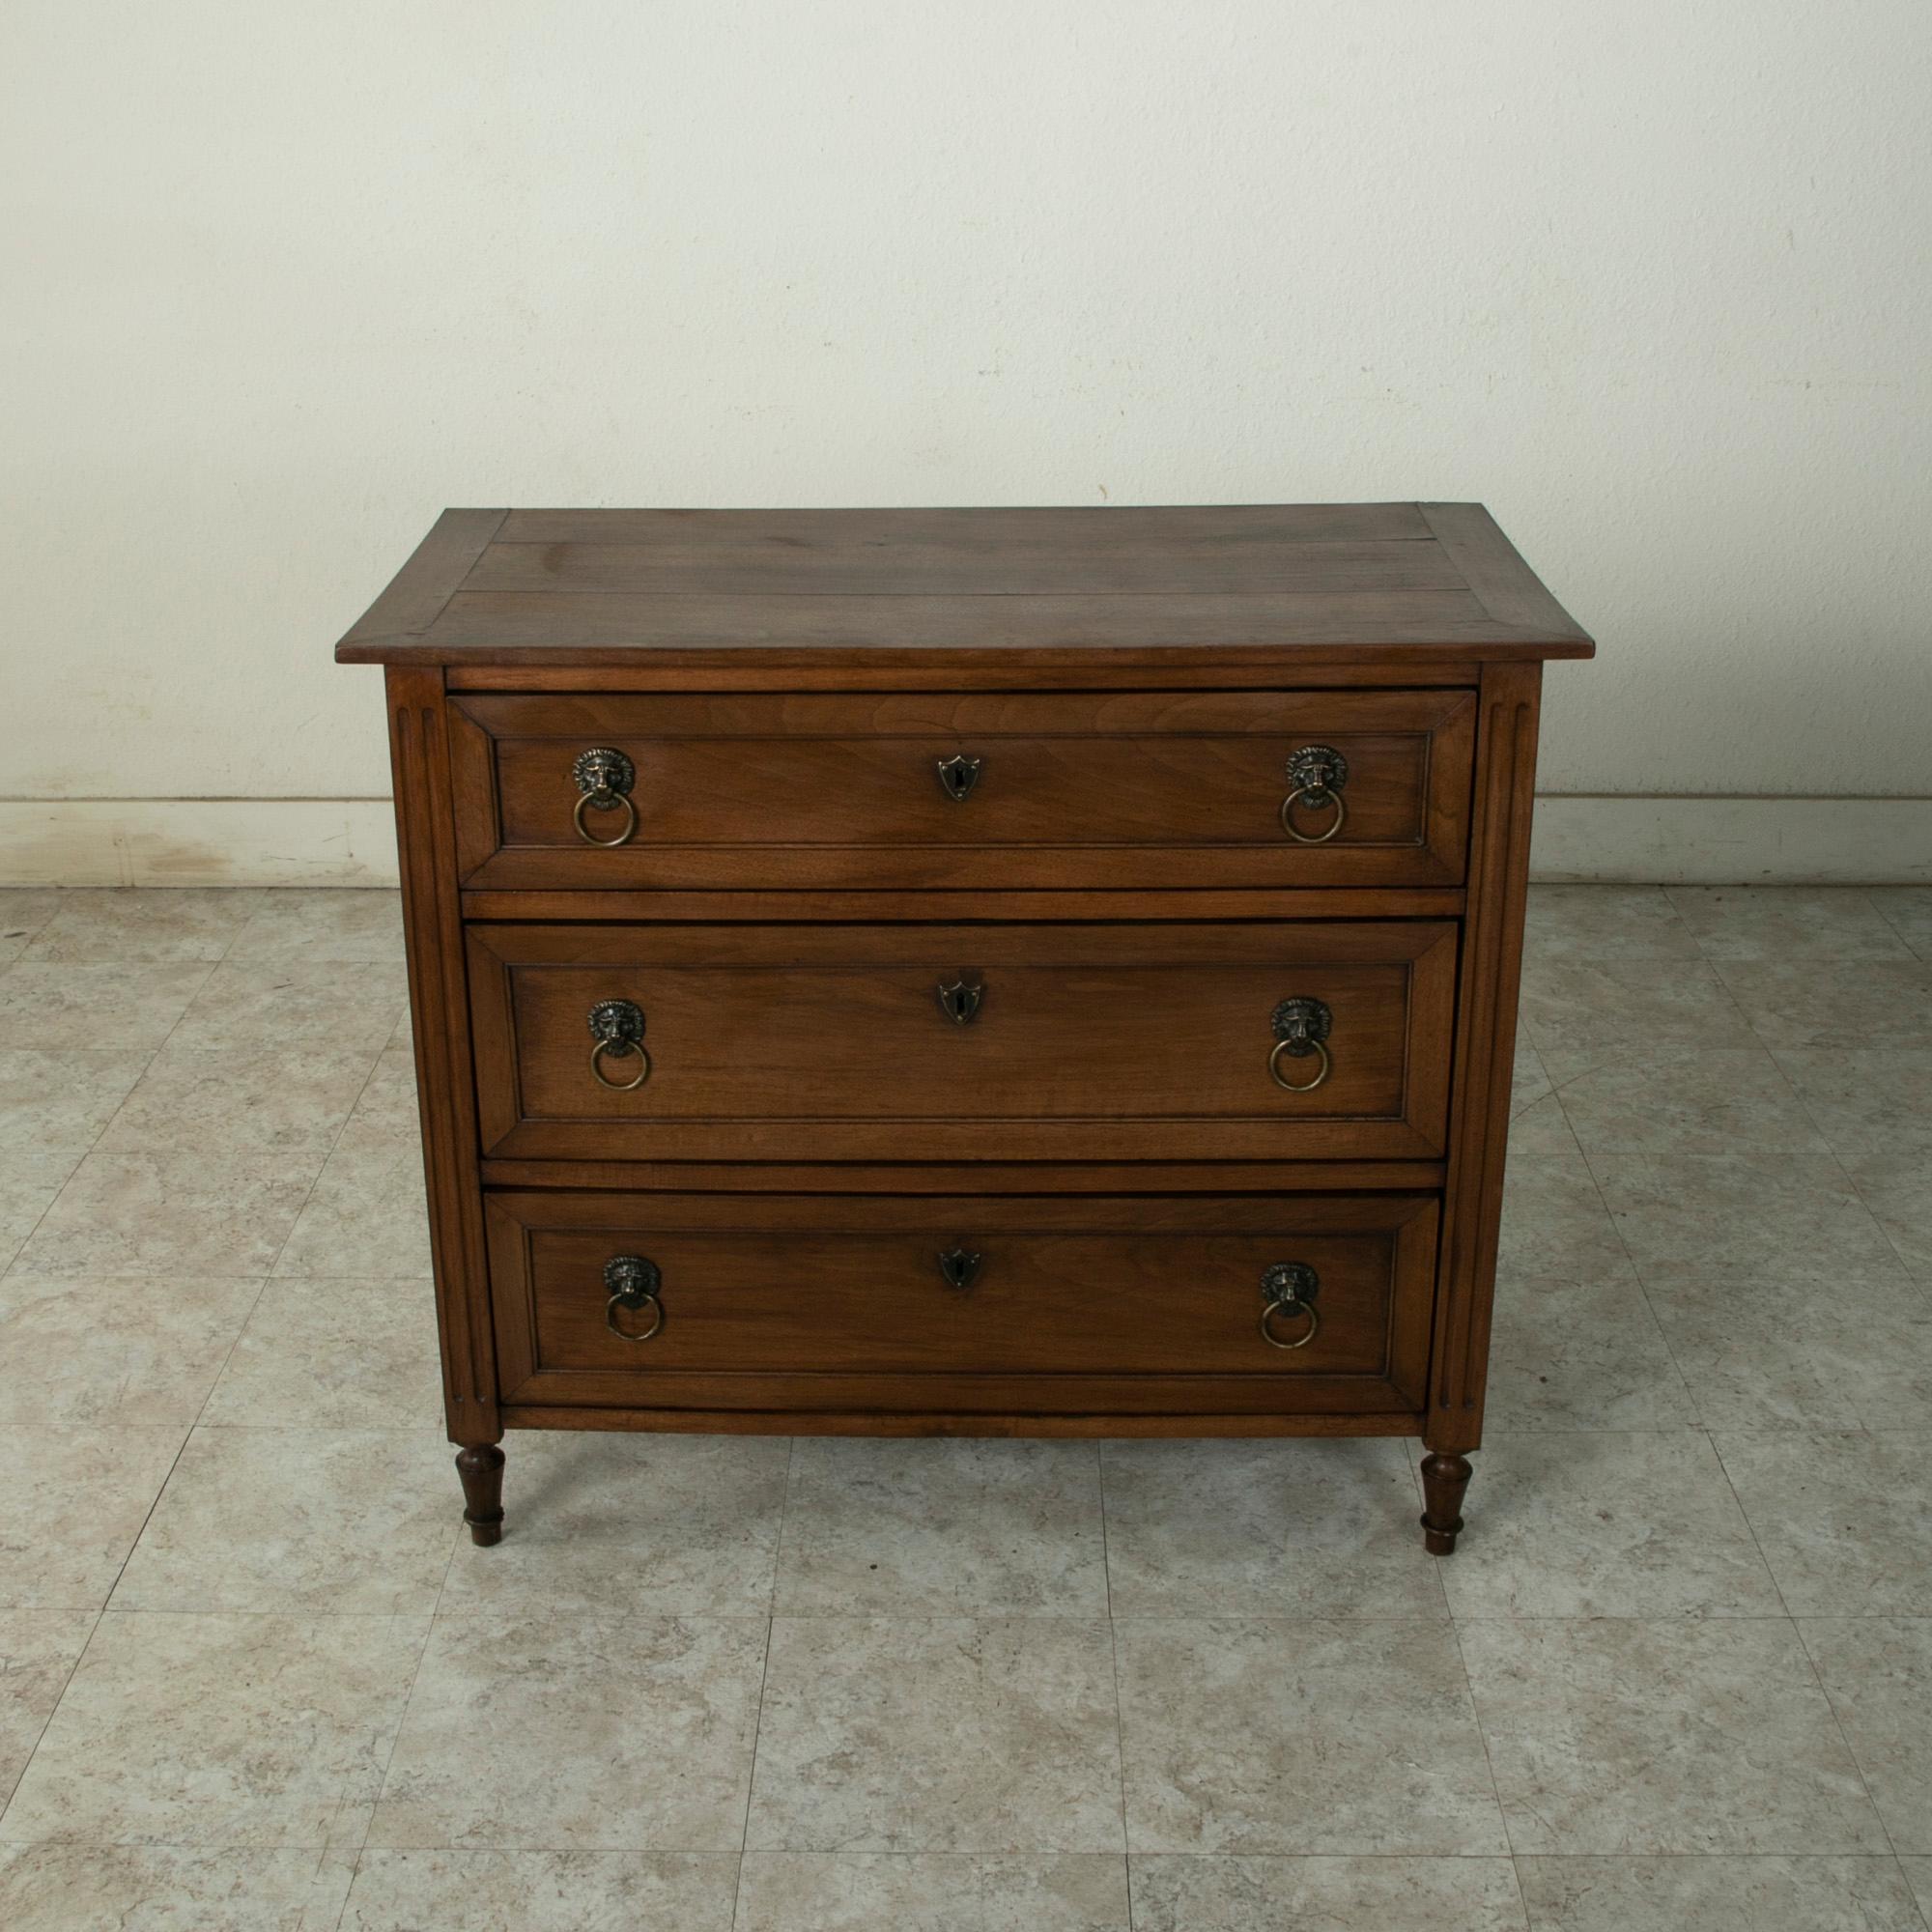 With a 40 inch width, this small scale late eighteenth century French Louis XVI period walnut commode or chest of drawers features a solid wood top, paneled sides, and fluted corners. Its three drawers of dovetail construction are appointed with